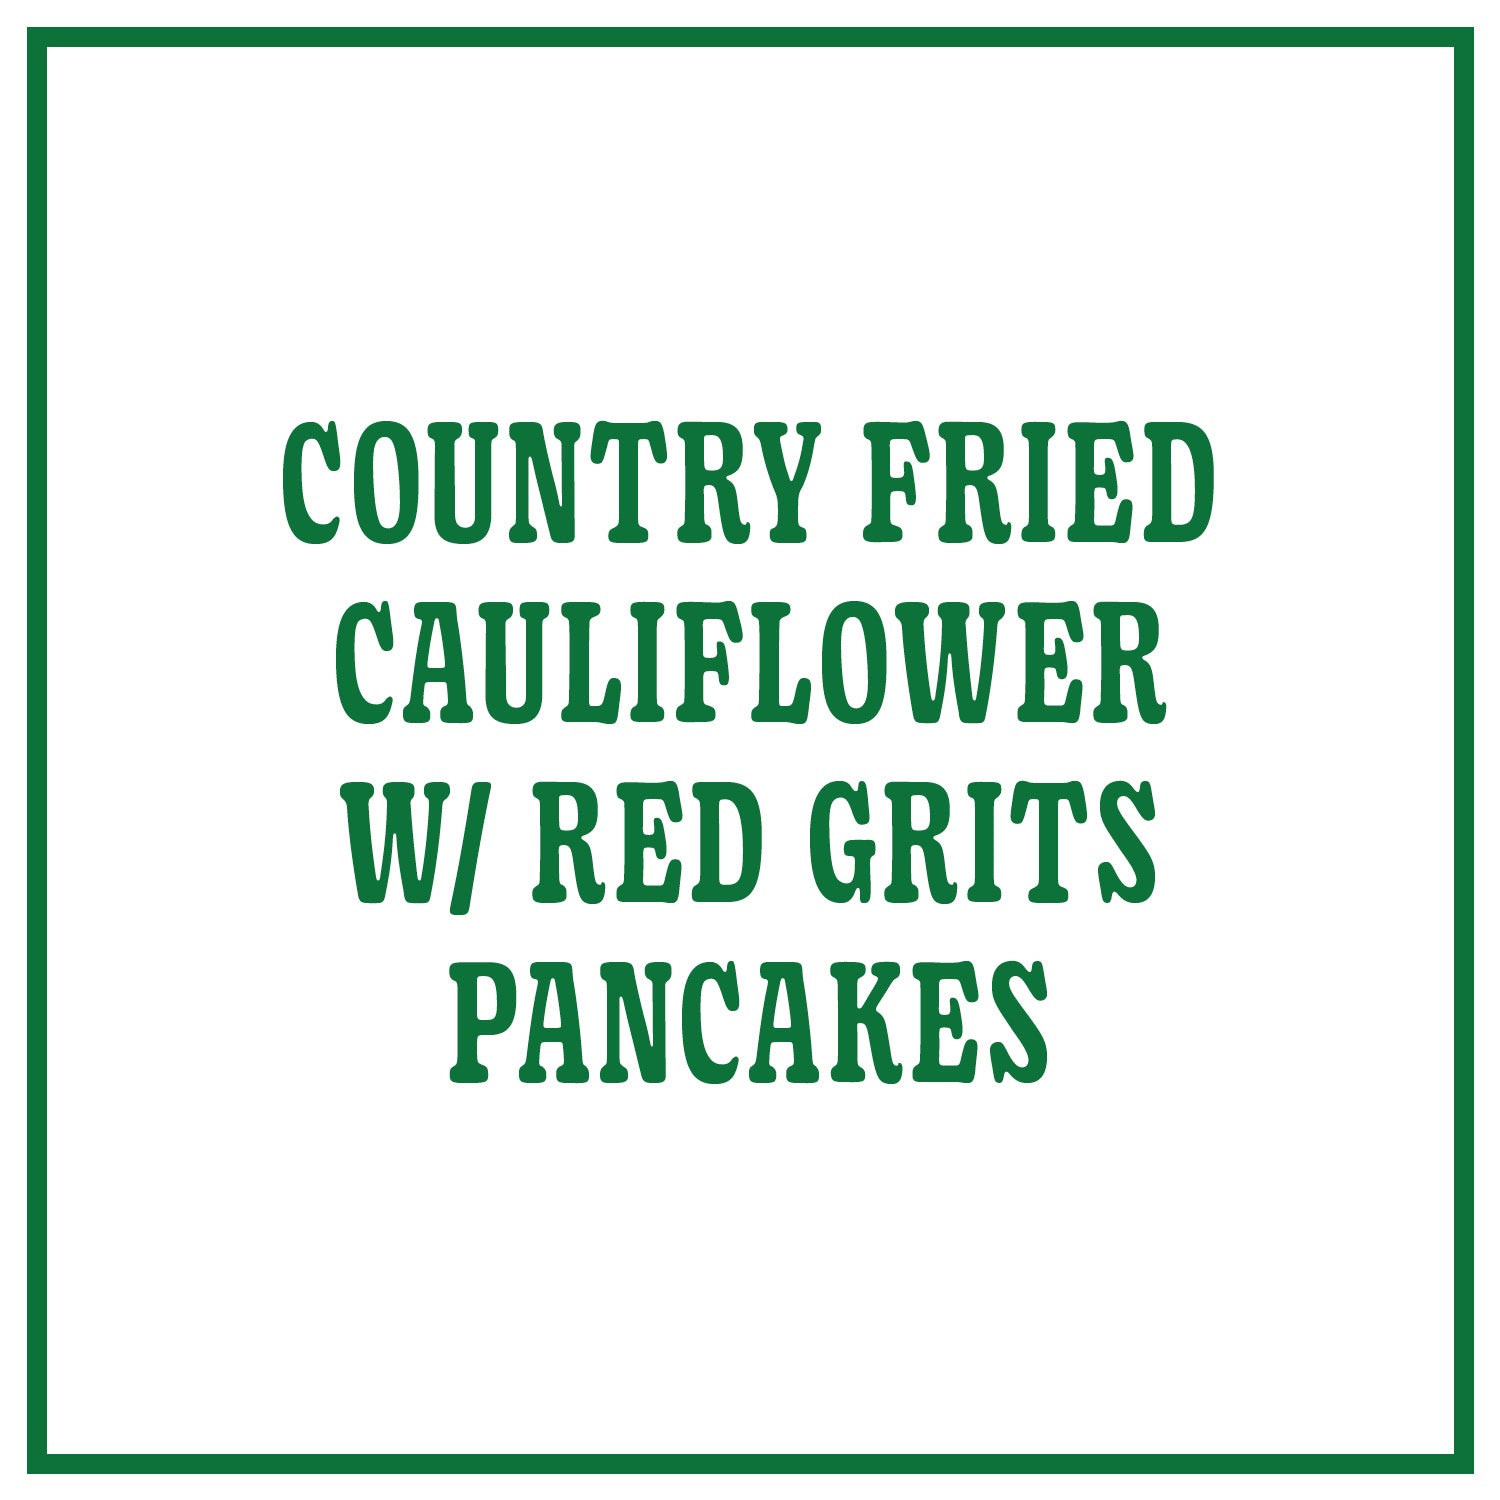 Country Fried Cauliflower with Red Grits Pancakes